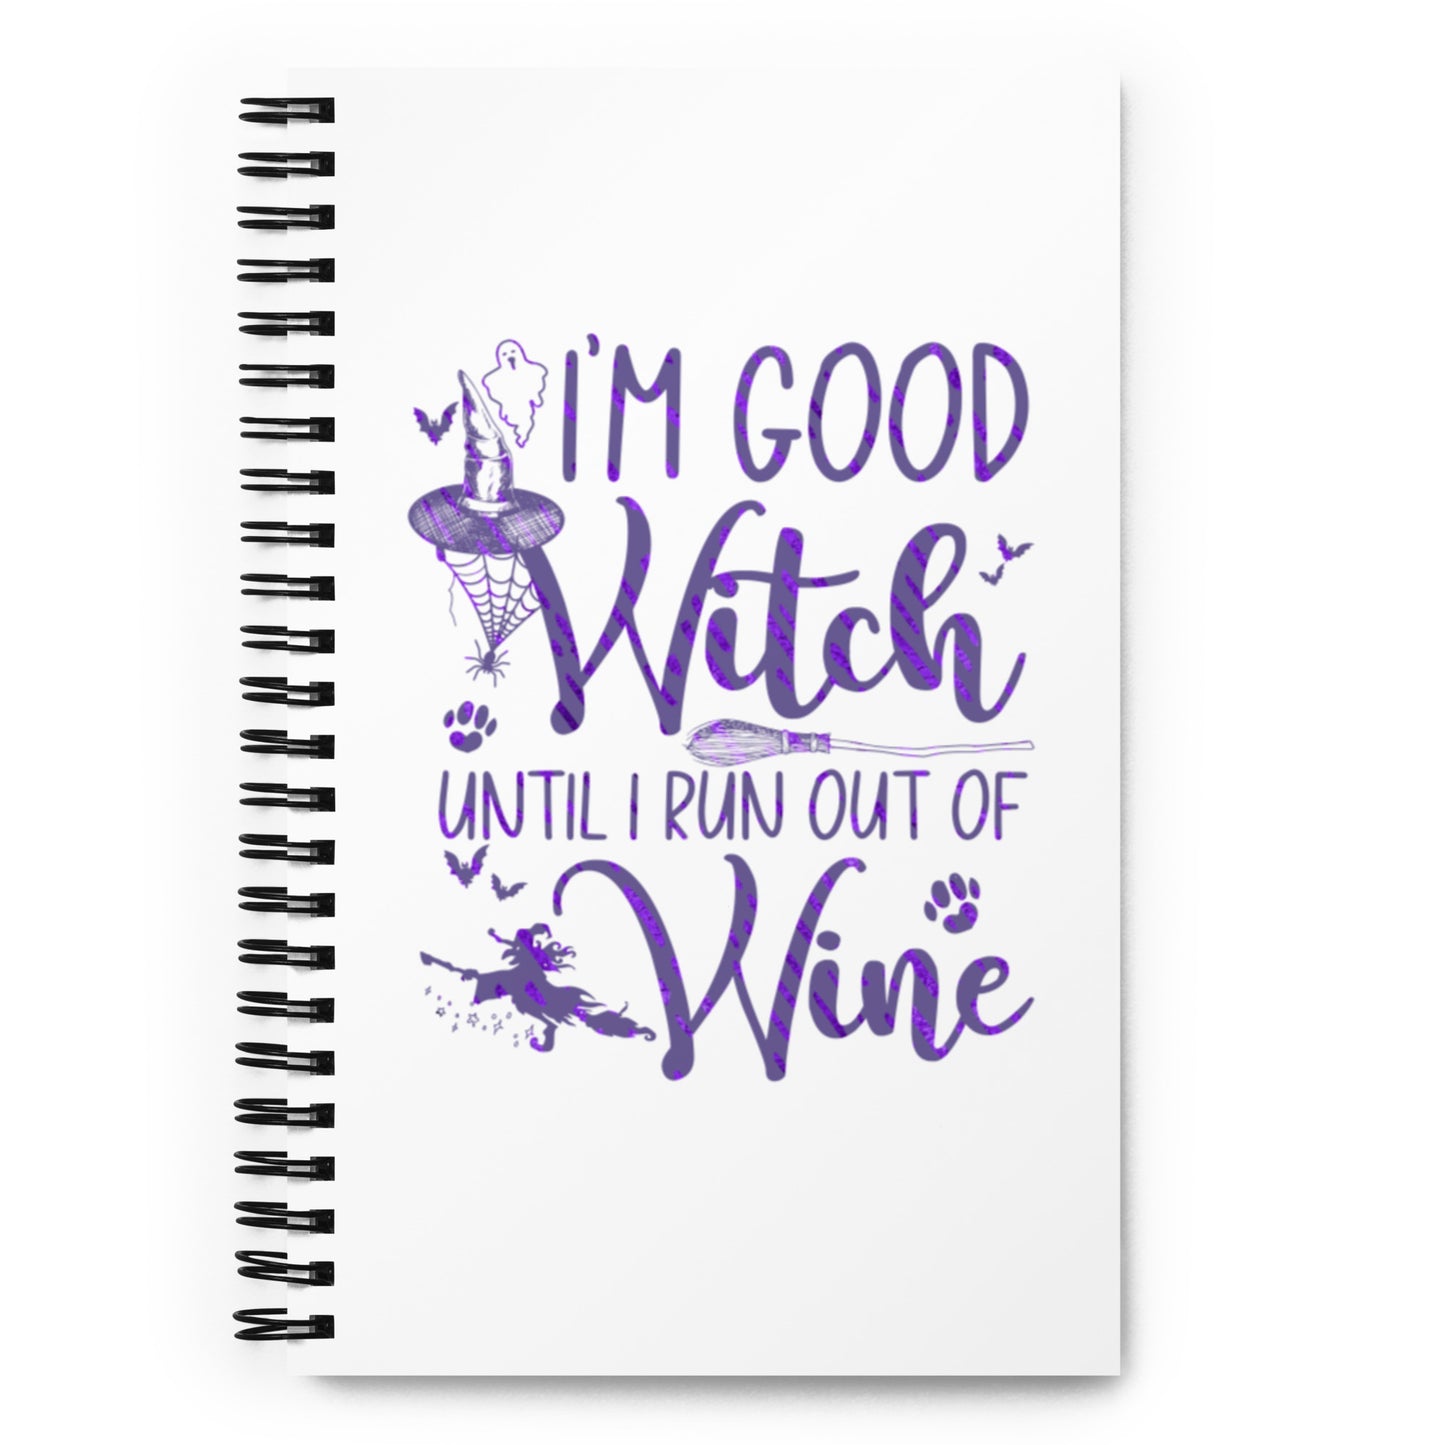 I'm a Good Witch Until I Run Out of Wine Spiral notebook